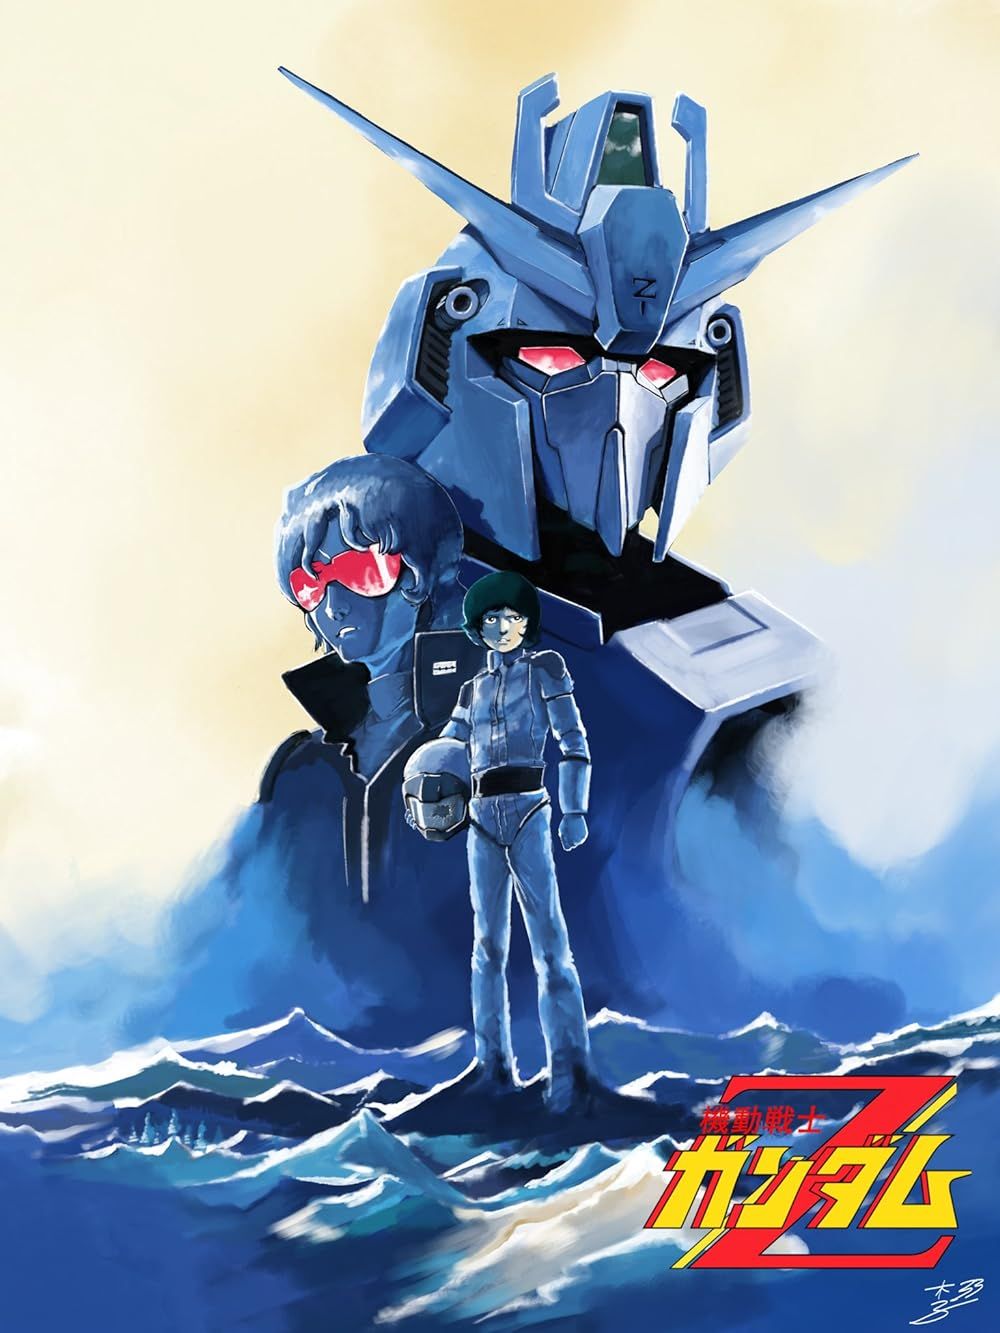 The characters standing near their mech in a blue and white poster for Mobile Suit Zeta Gundam